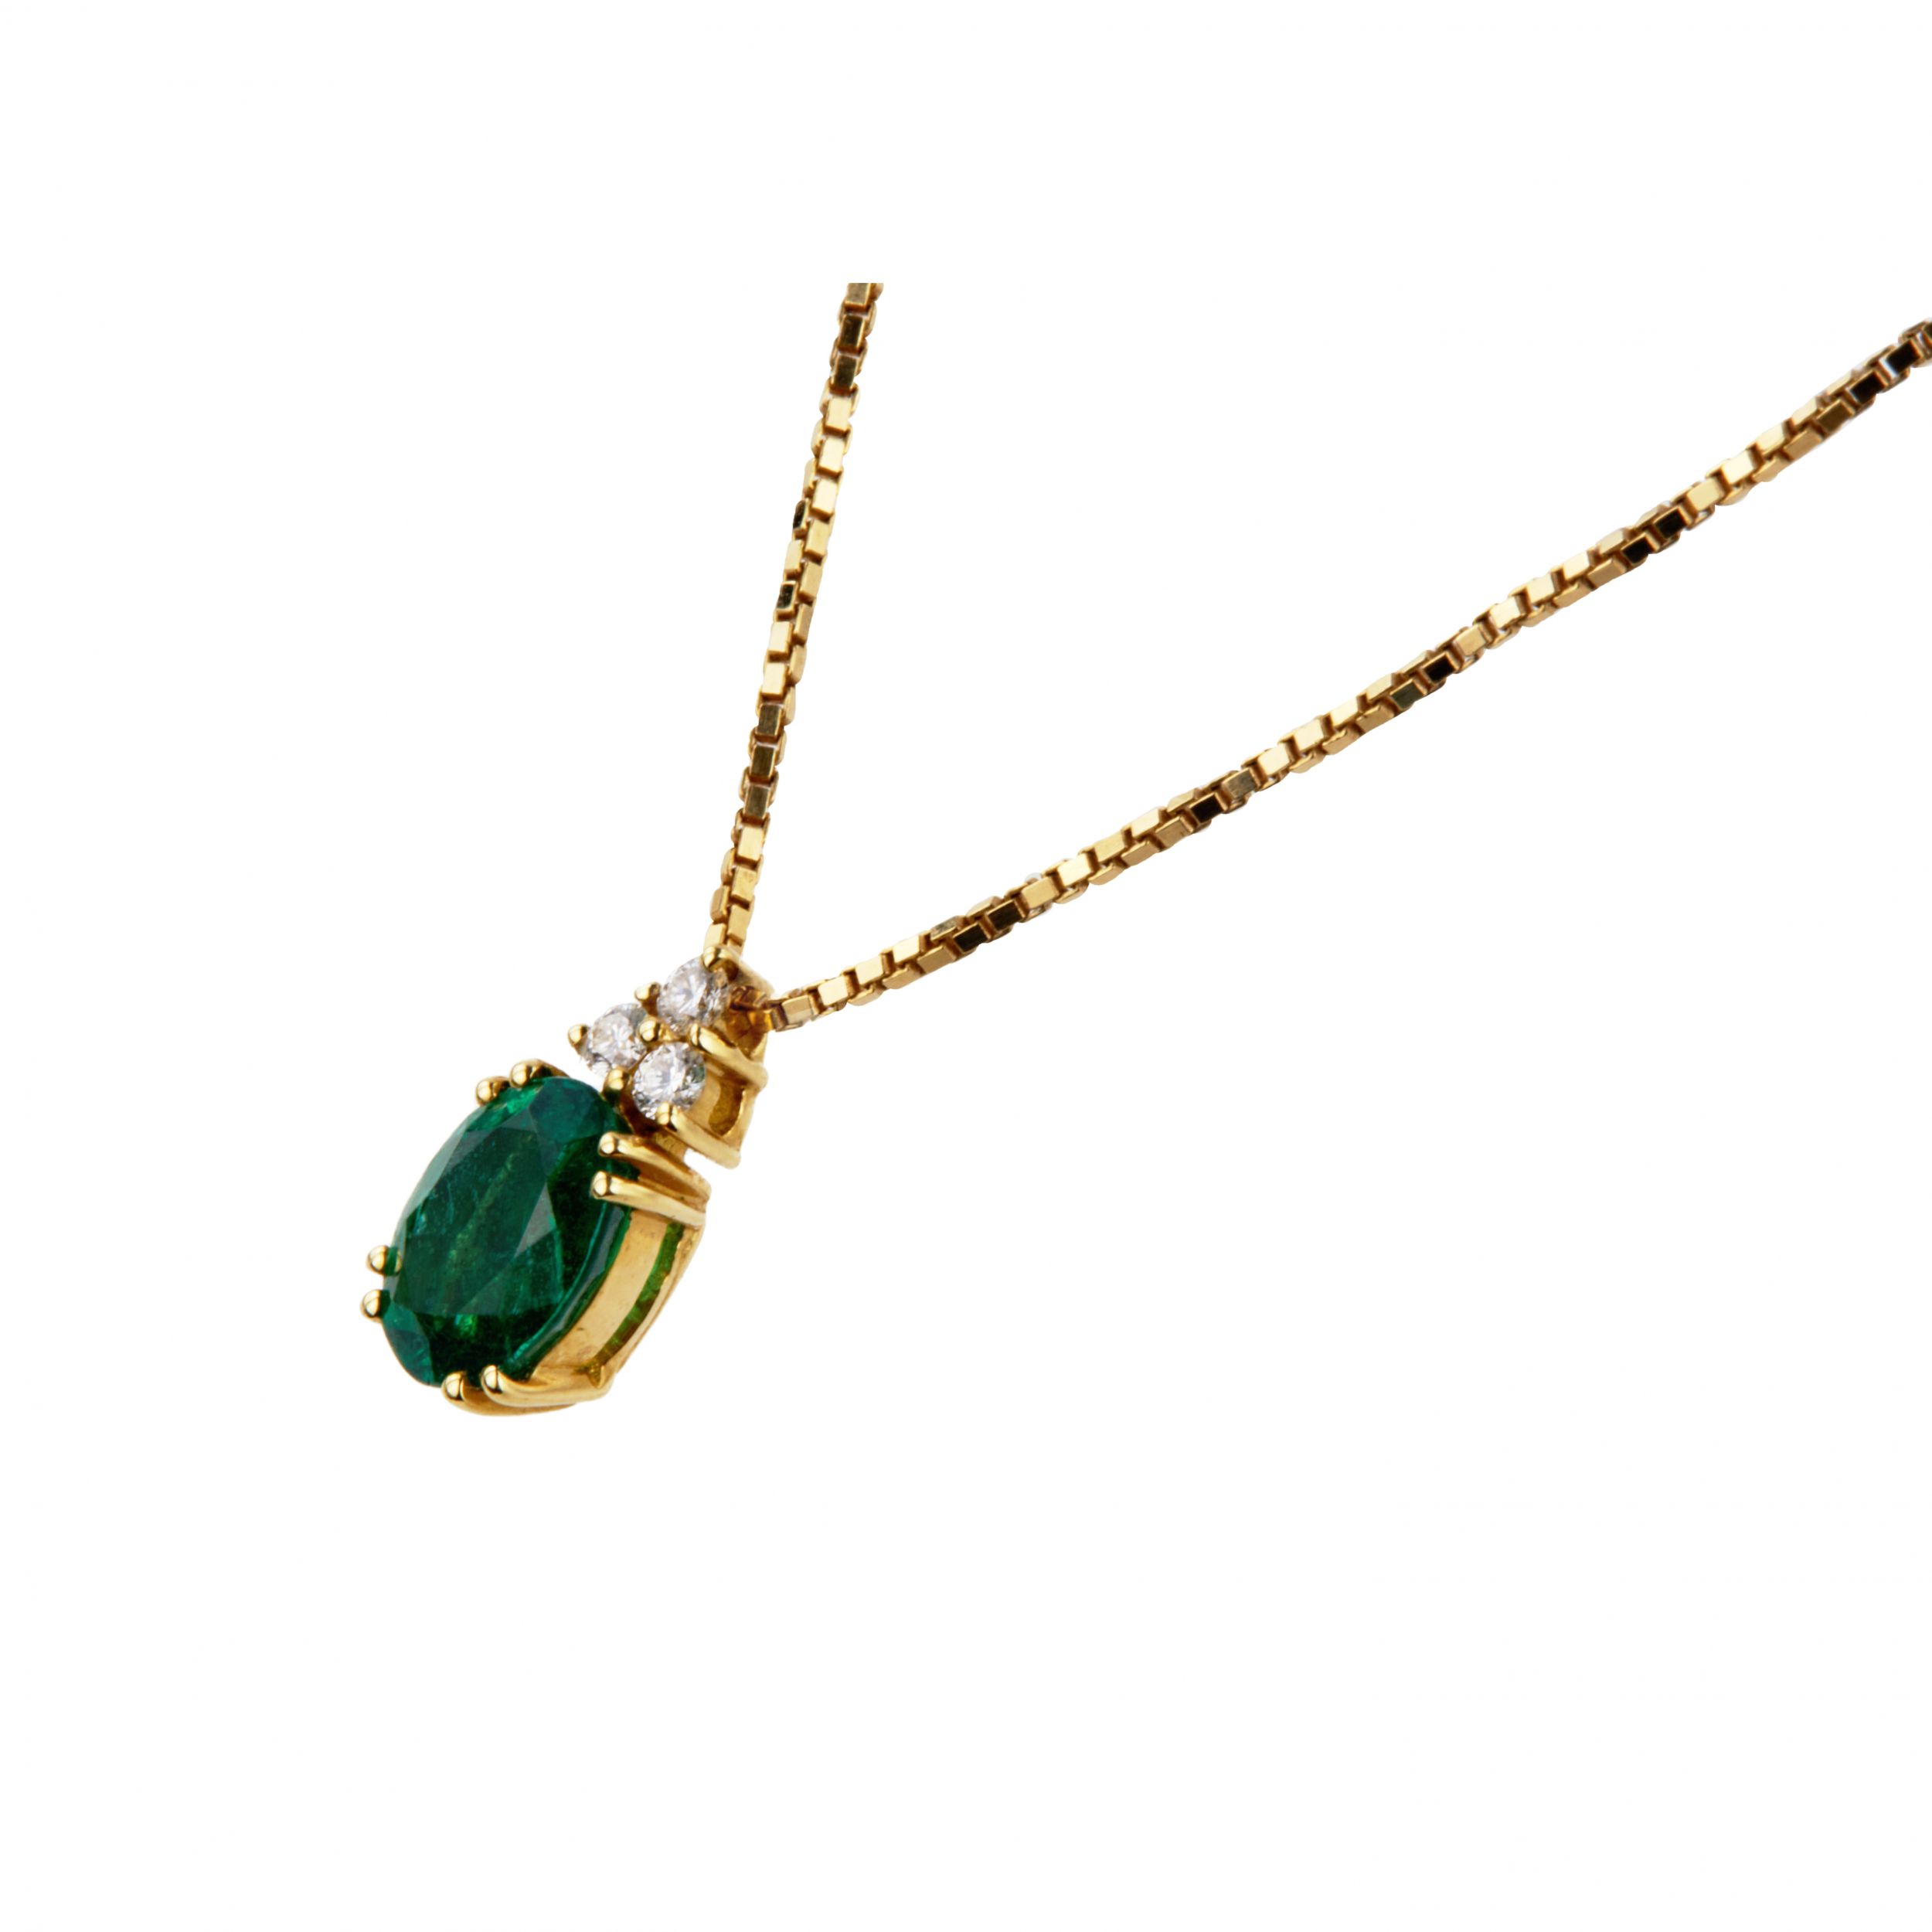 Giorgio Visconti. 18K gold pendant and earrings with emeralds and diamonds. - Image 4 of 8